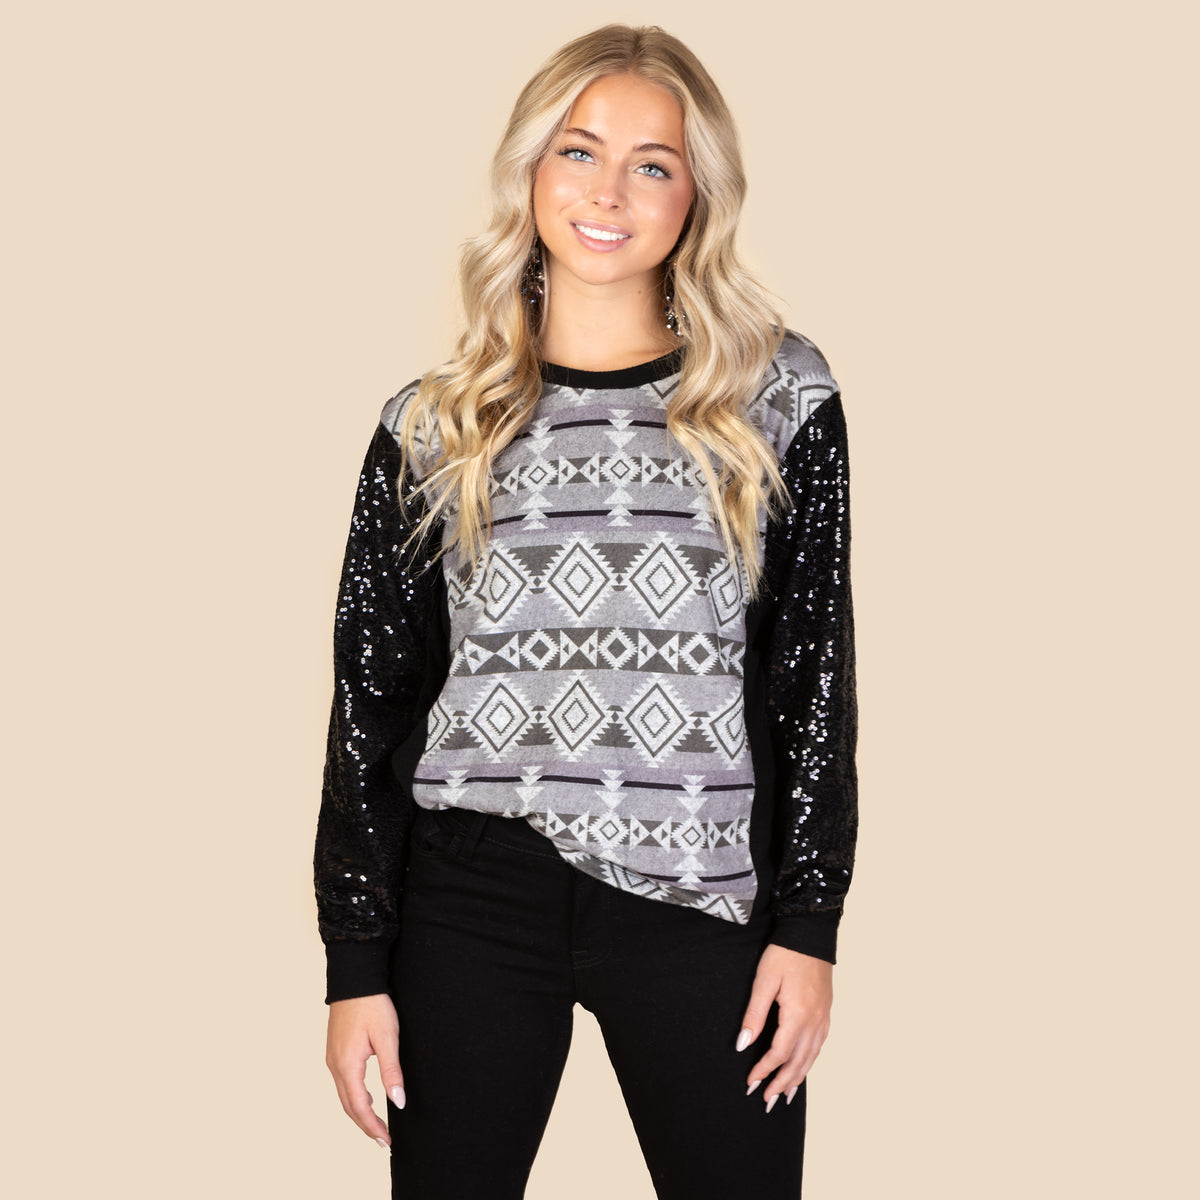 20145 - Geometric Pattern Top with Sequin Sleeves